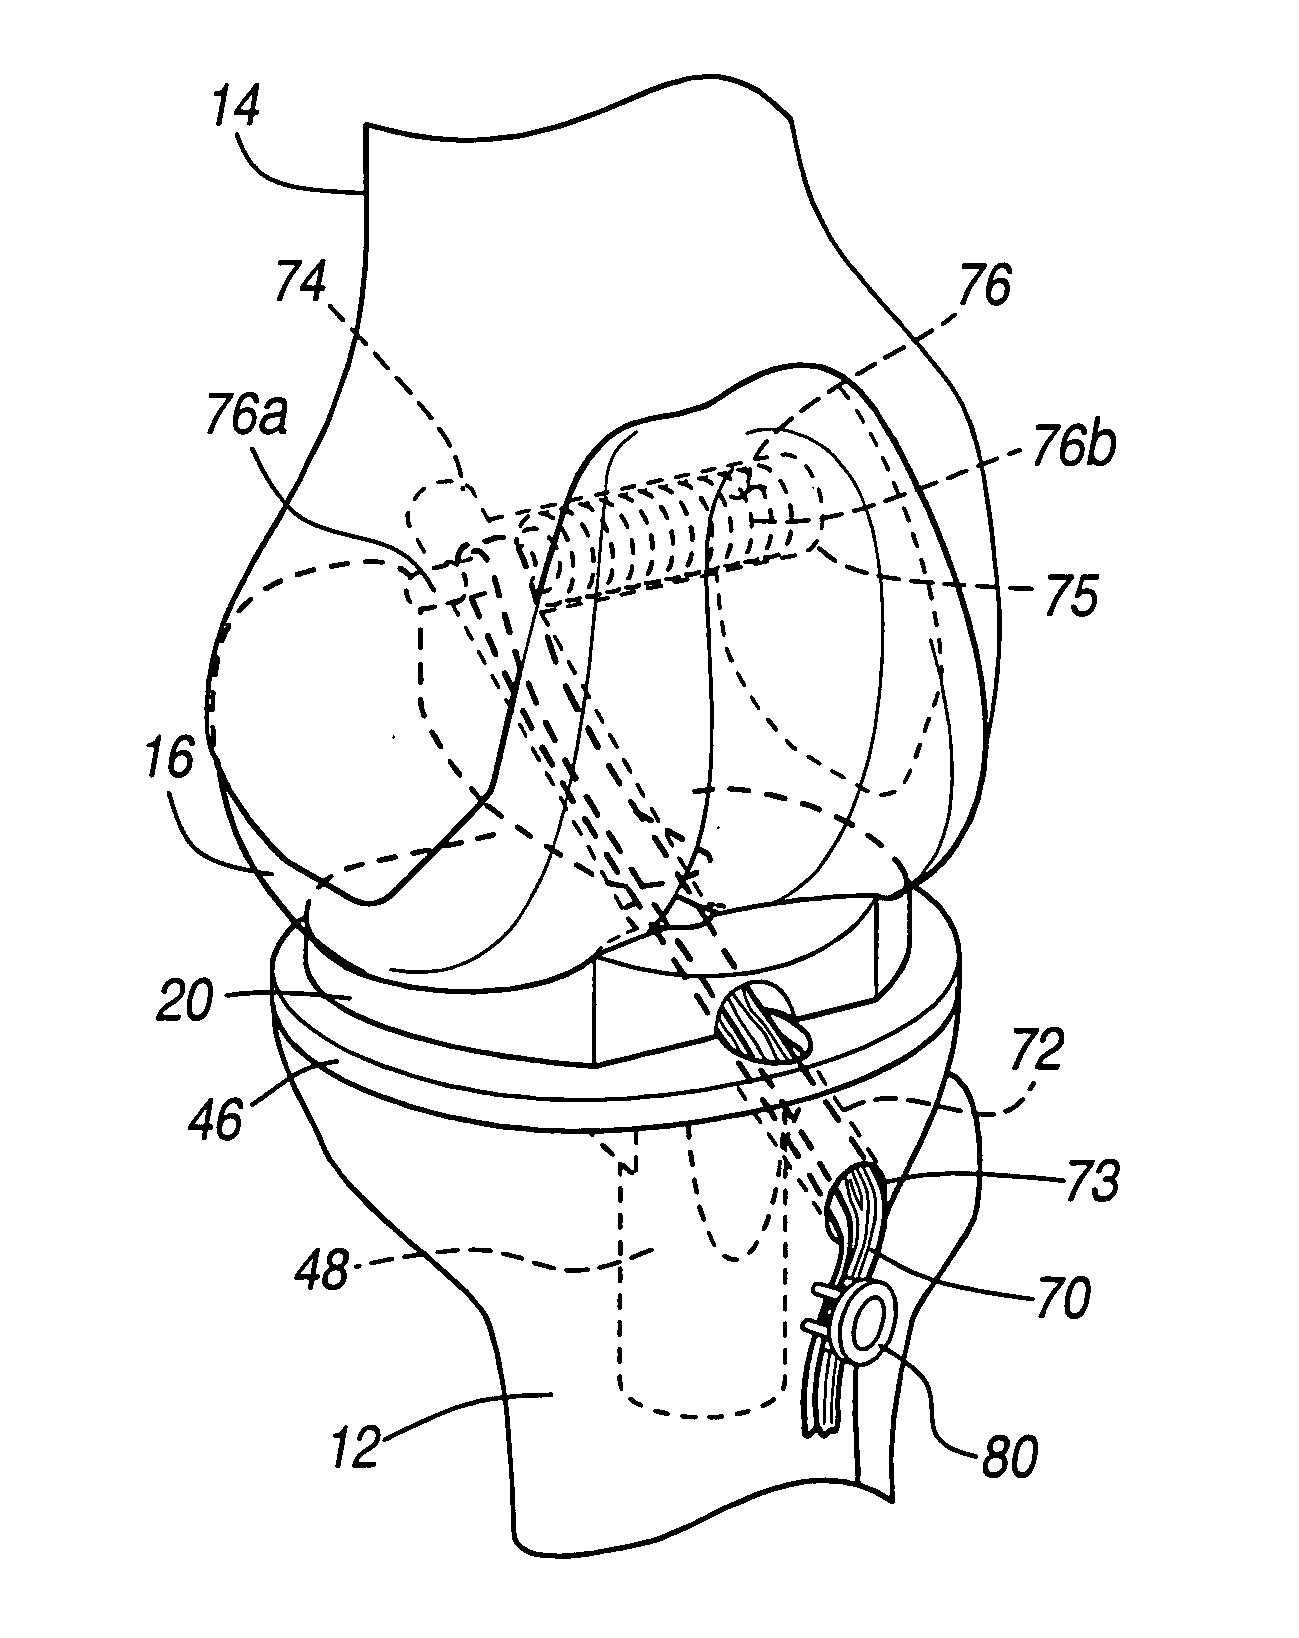 Knee prosthesis with graft ligaments